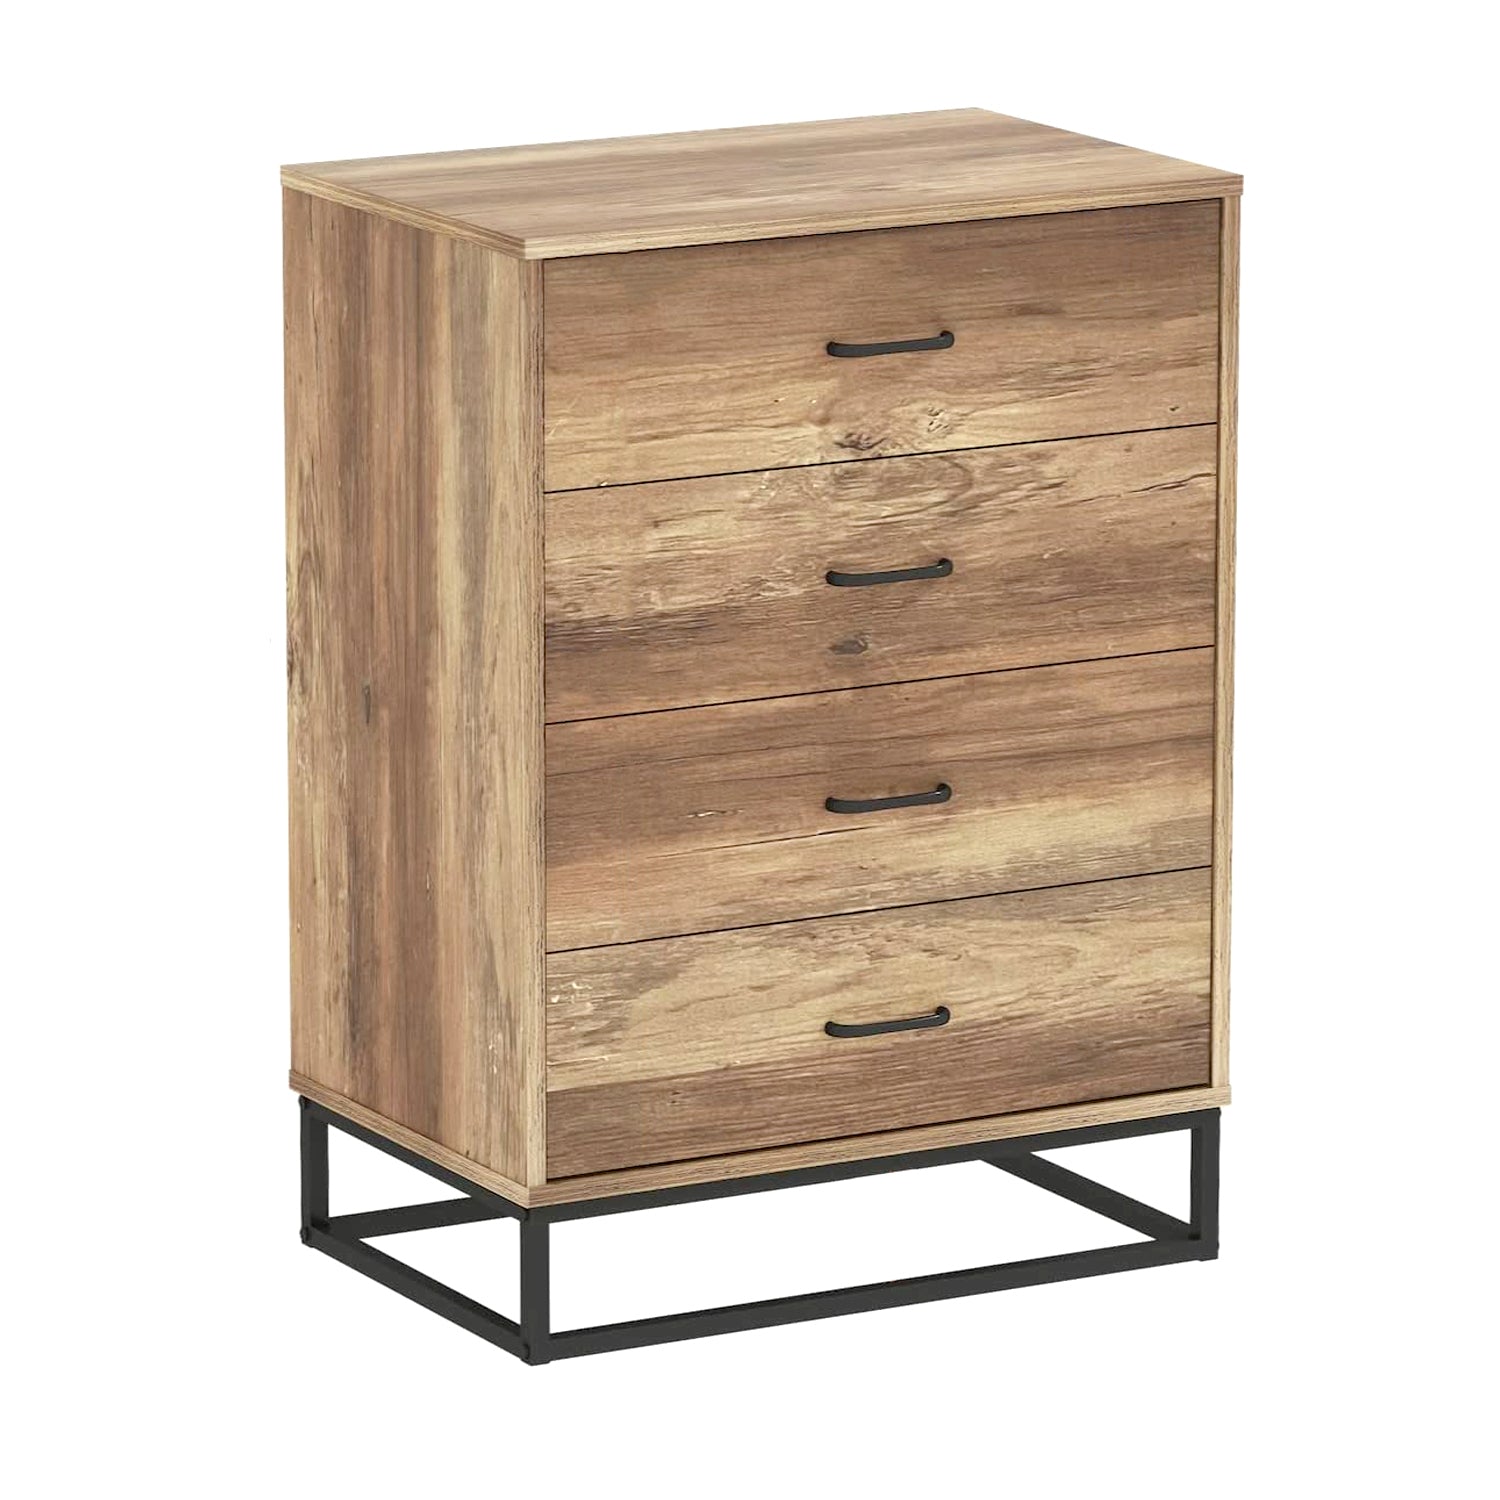 4 Drawer Wood Storage Dresser With Easy Pull Handle And Metal Frame For Bedroom, Living Room, Hallway, And Office - Pier 1